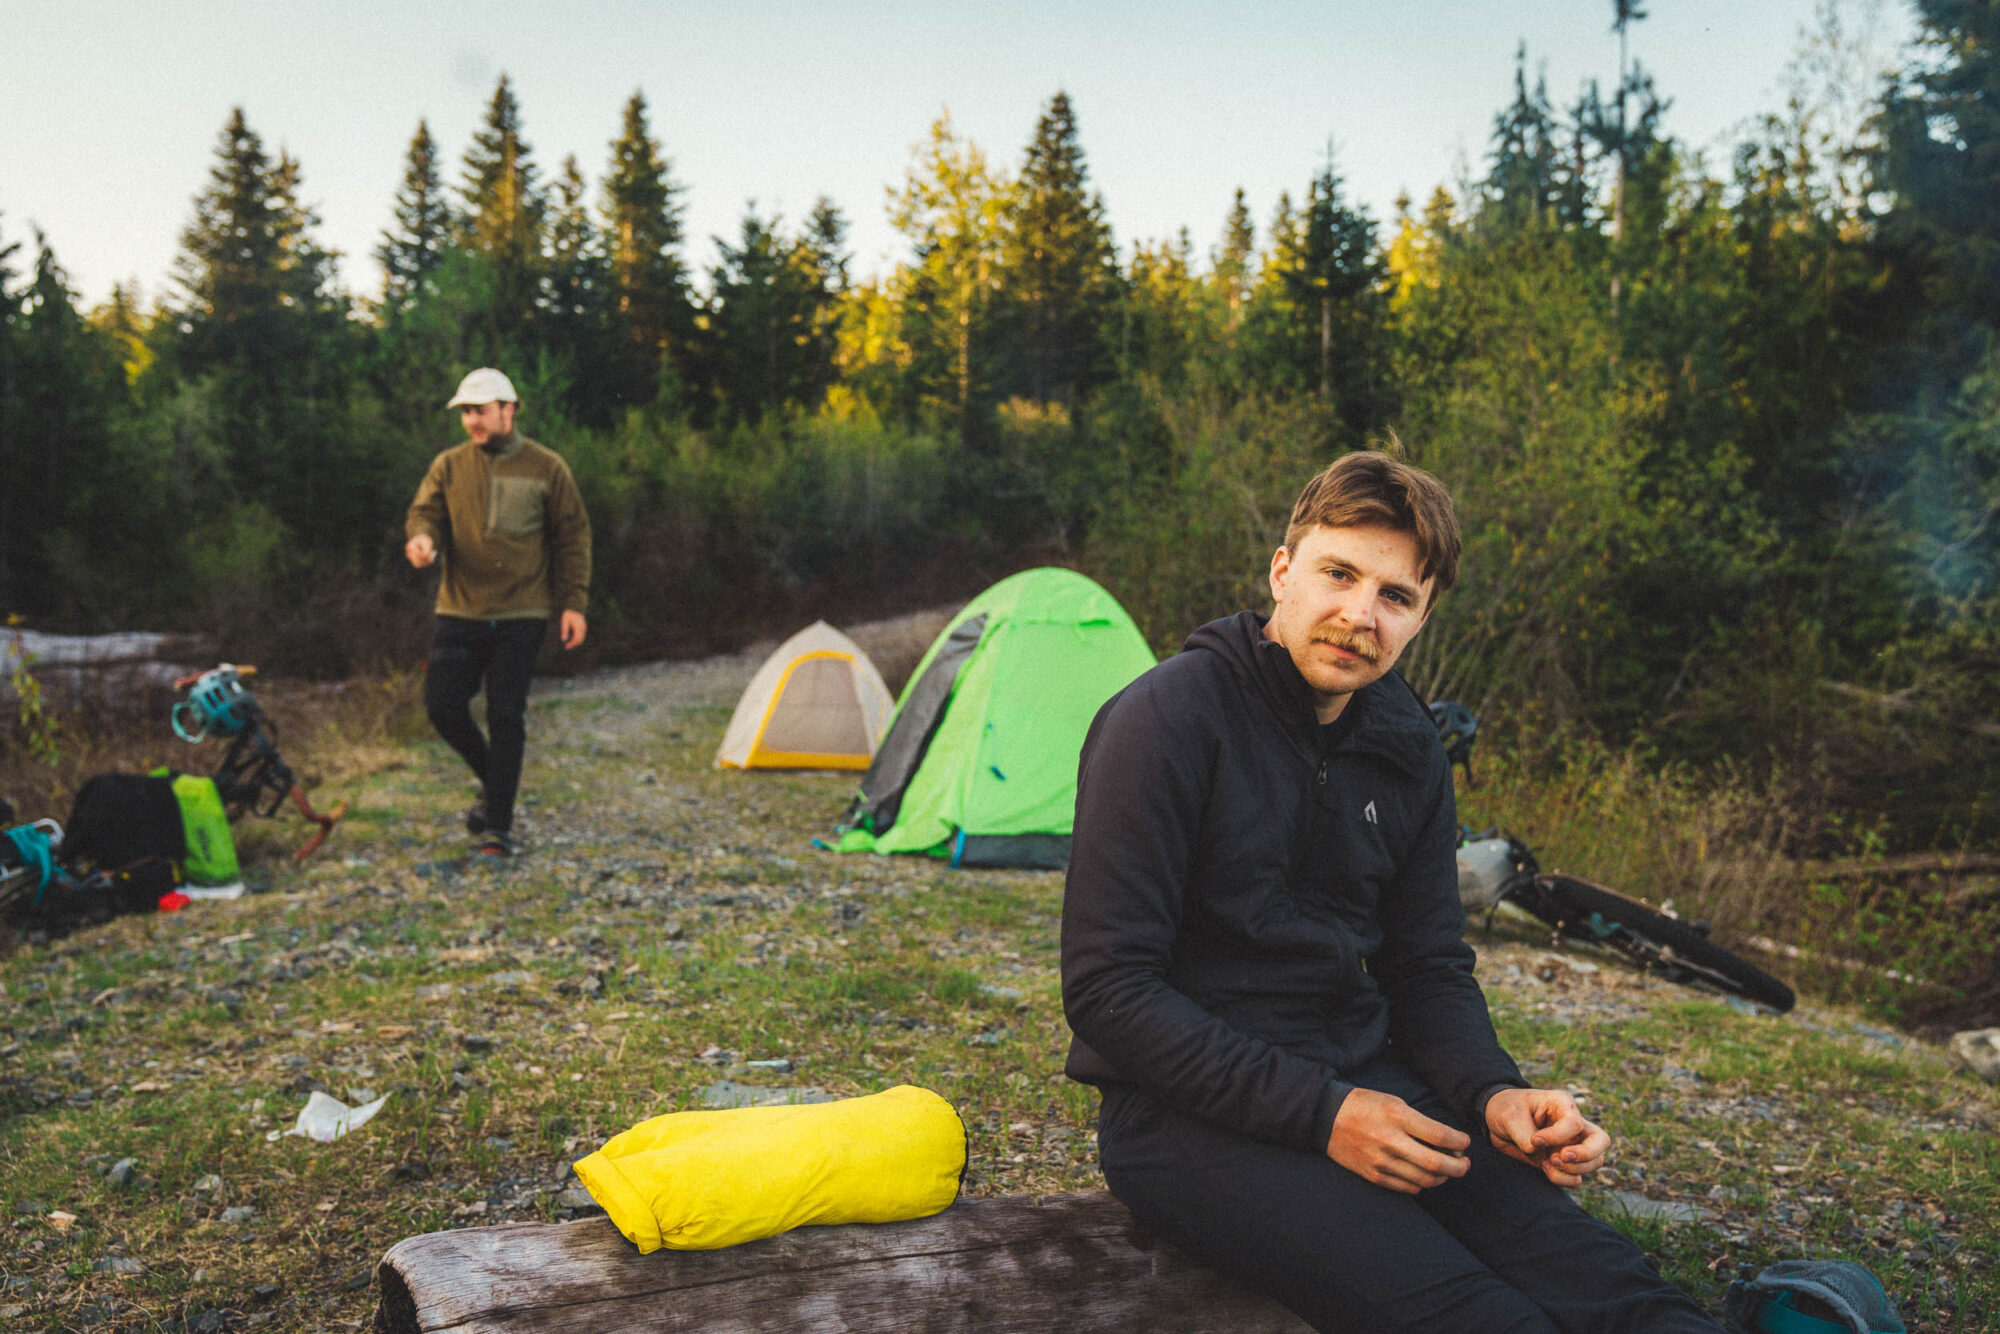 Bikepacking and Coming of Age